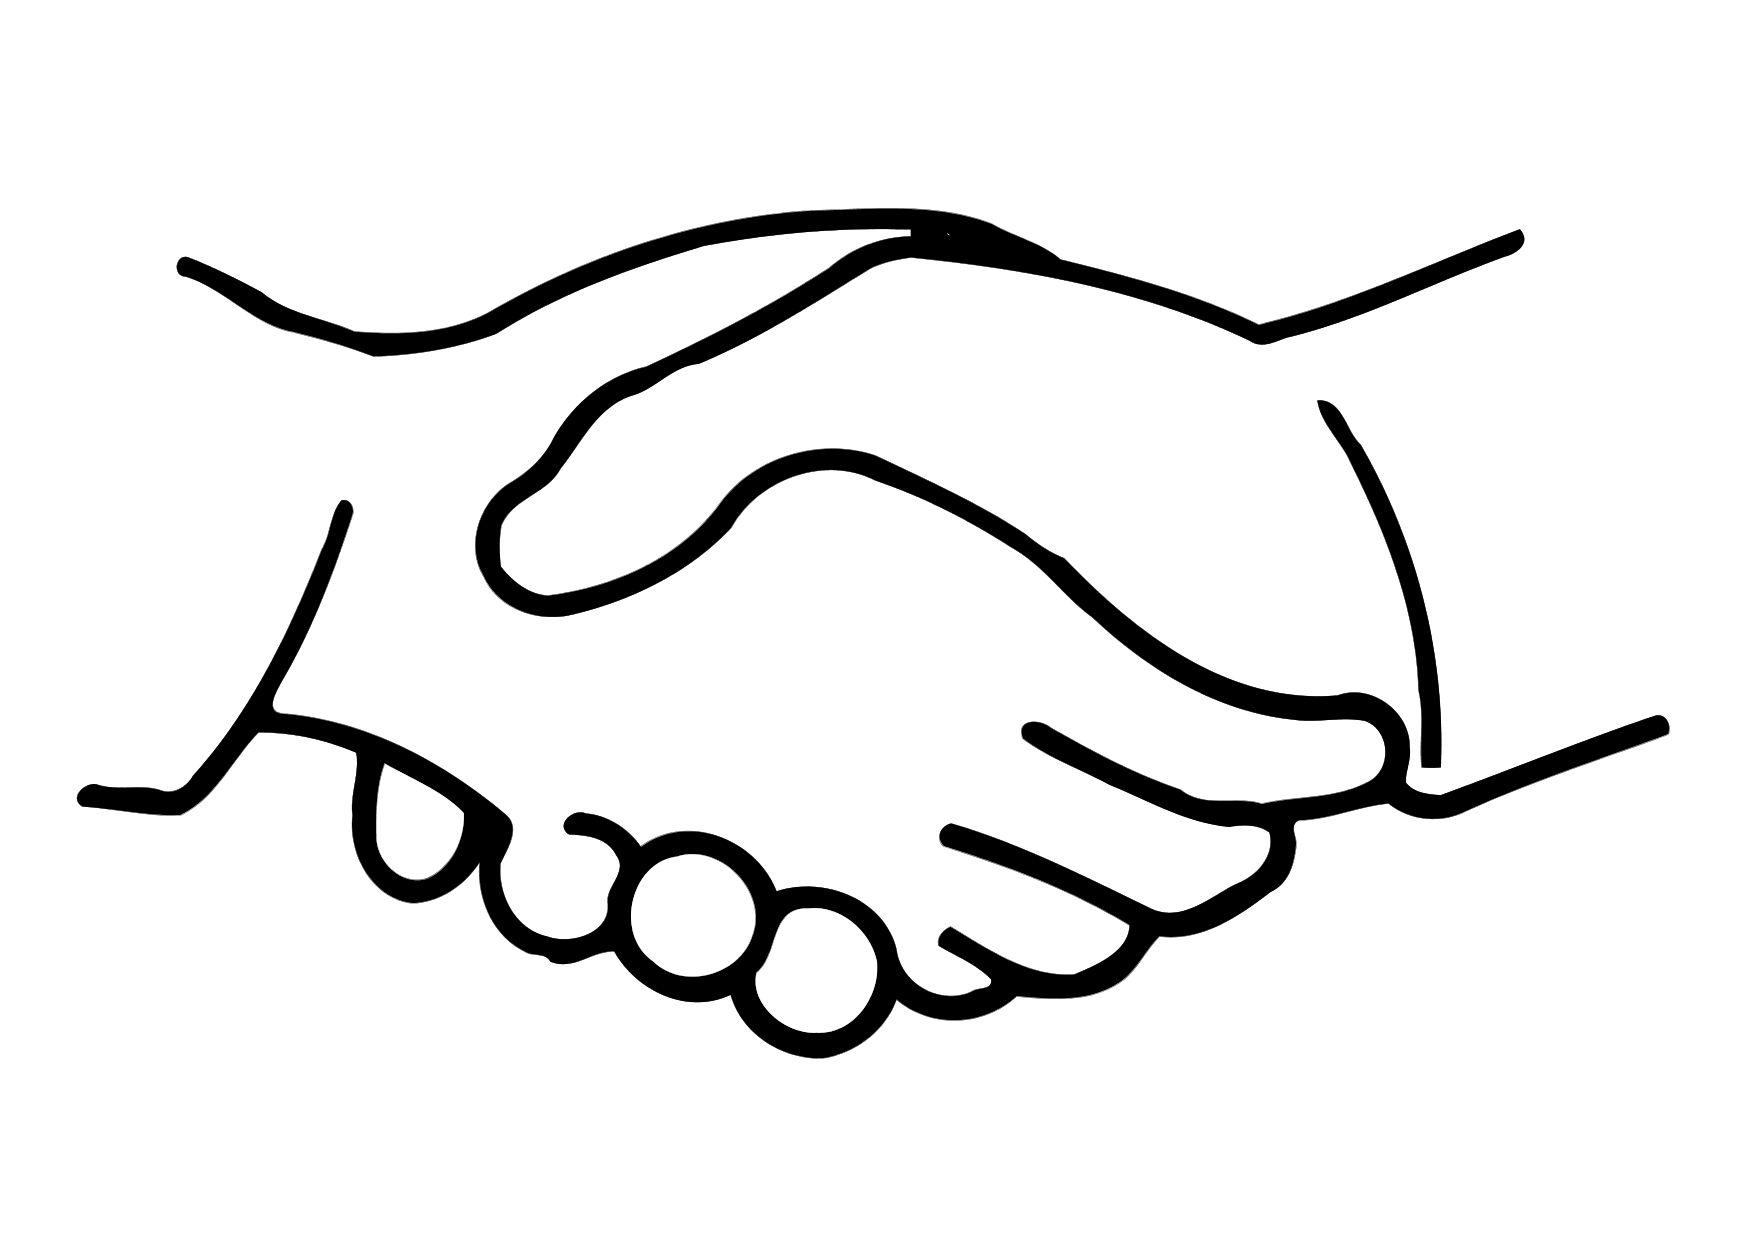 Coloring page shake hands - img 11321.